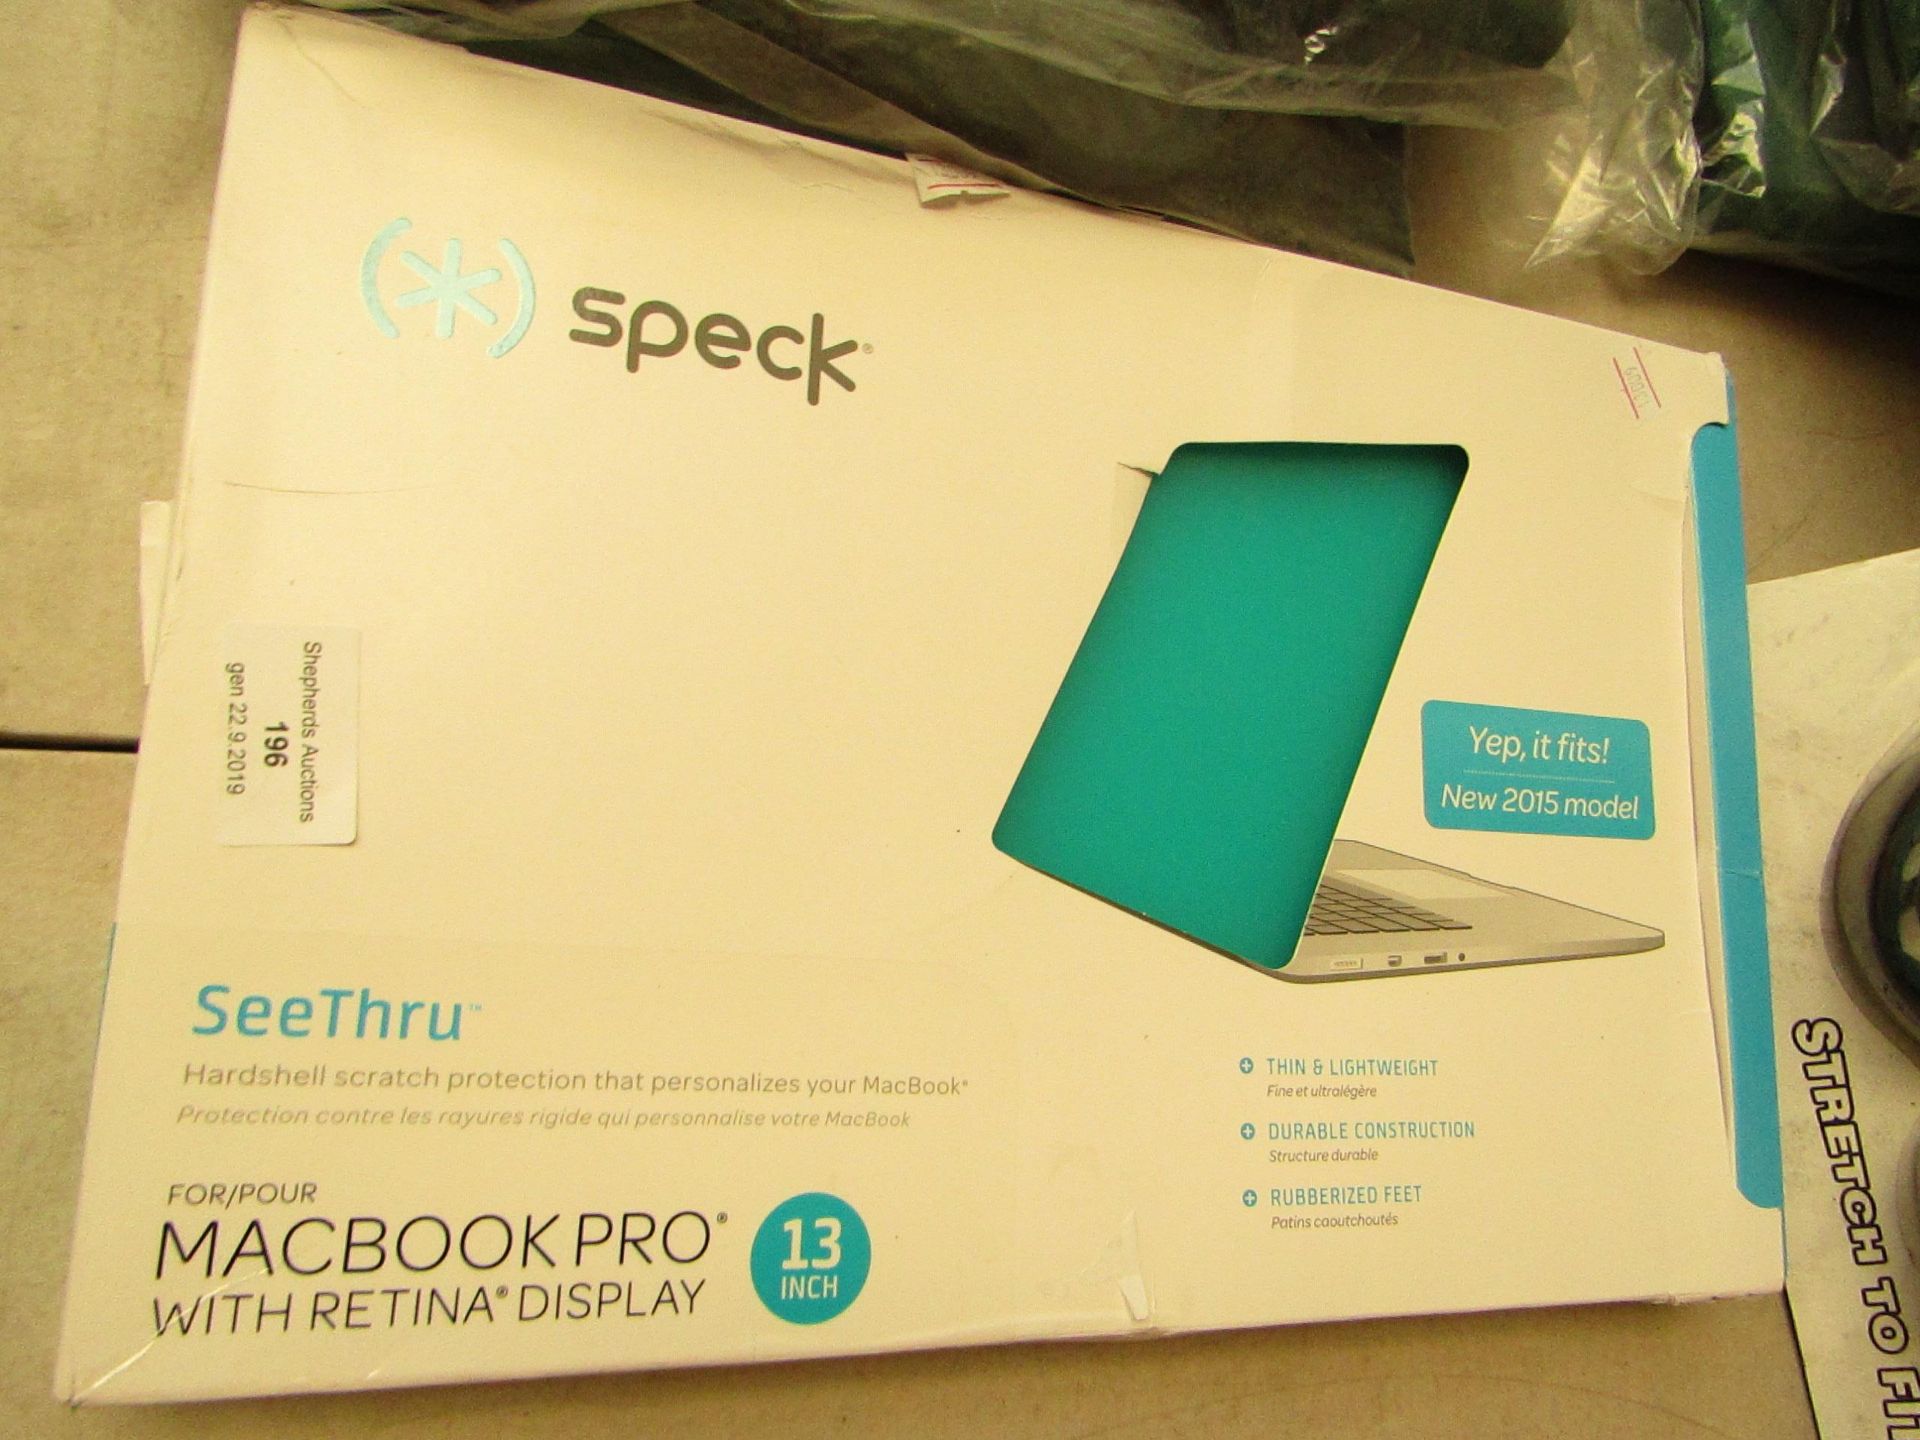 Speck Seethru Macbook Pro With retina Display.13 Inch Case.Boxed